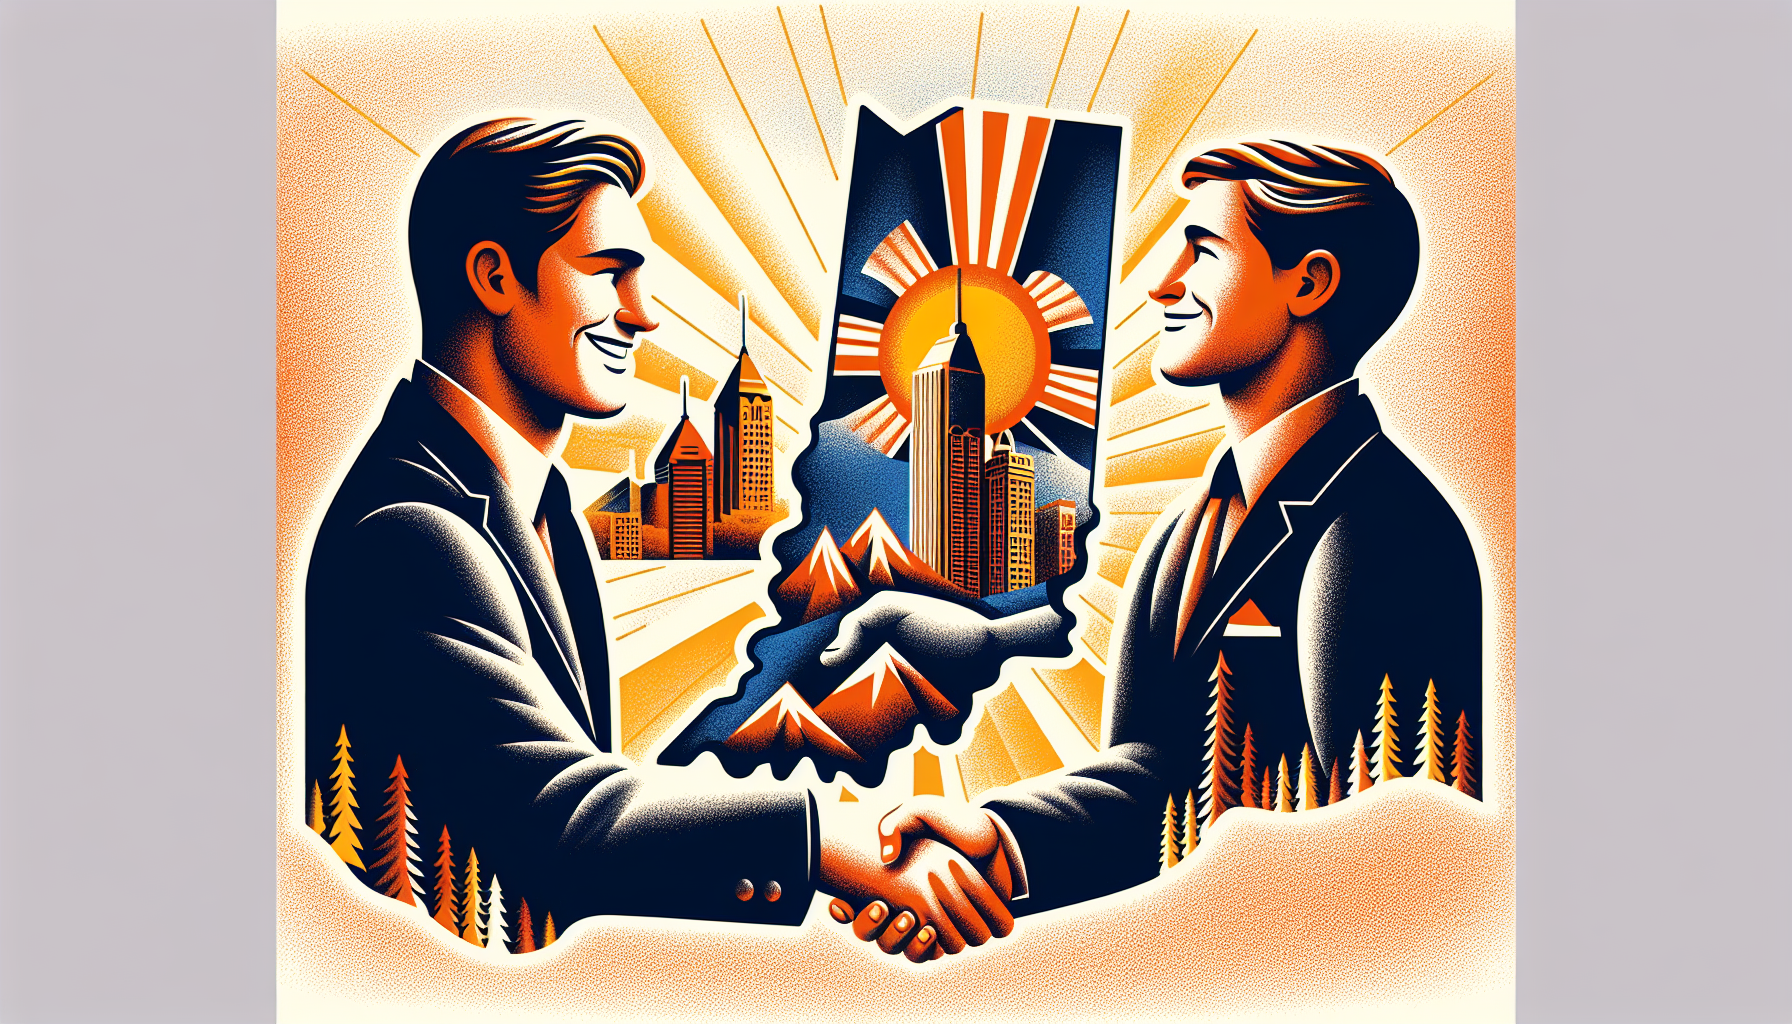 Illustration of a landlord and tenant shaking hands